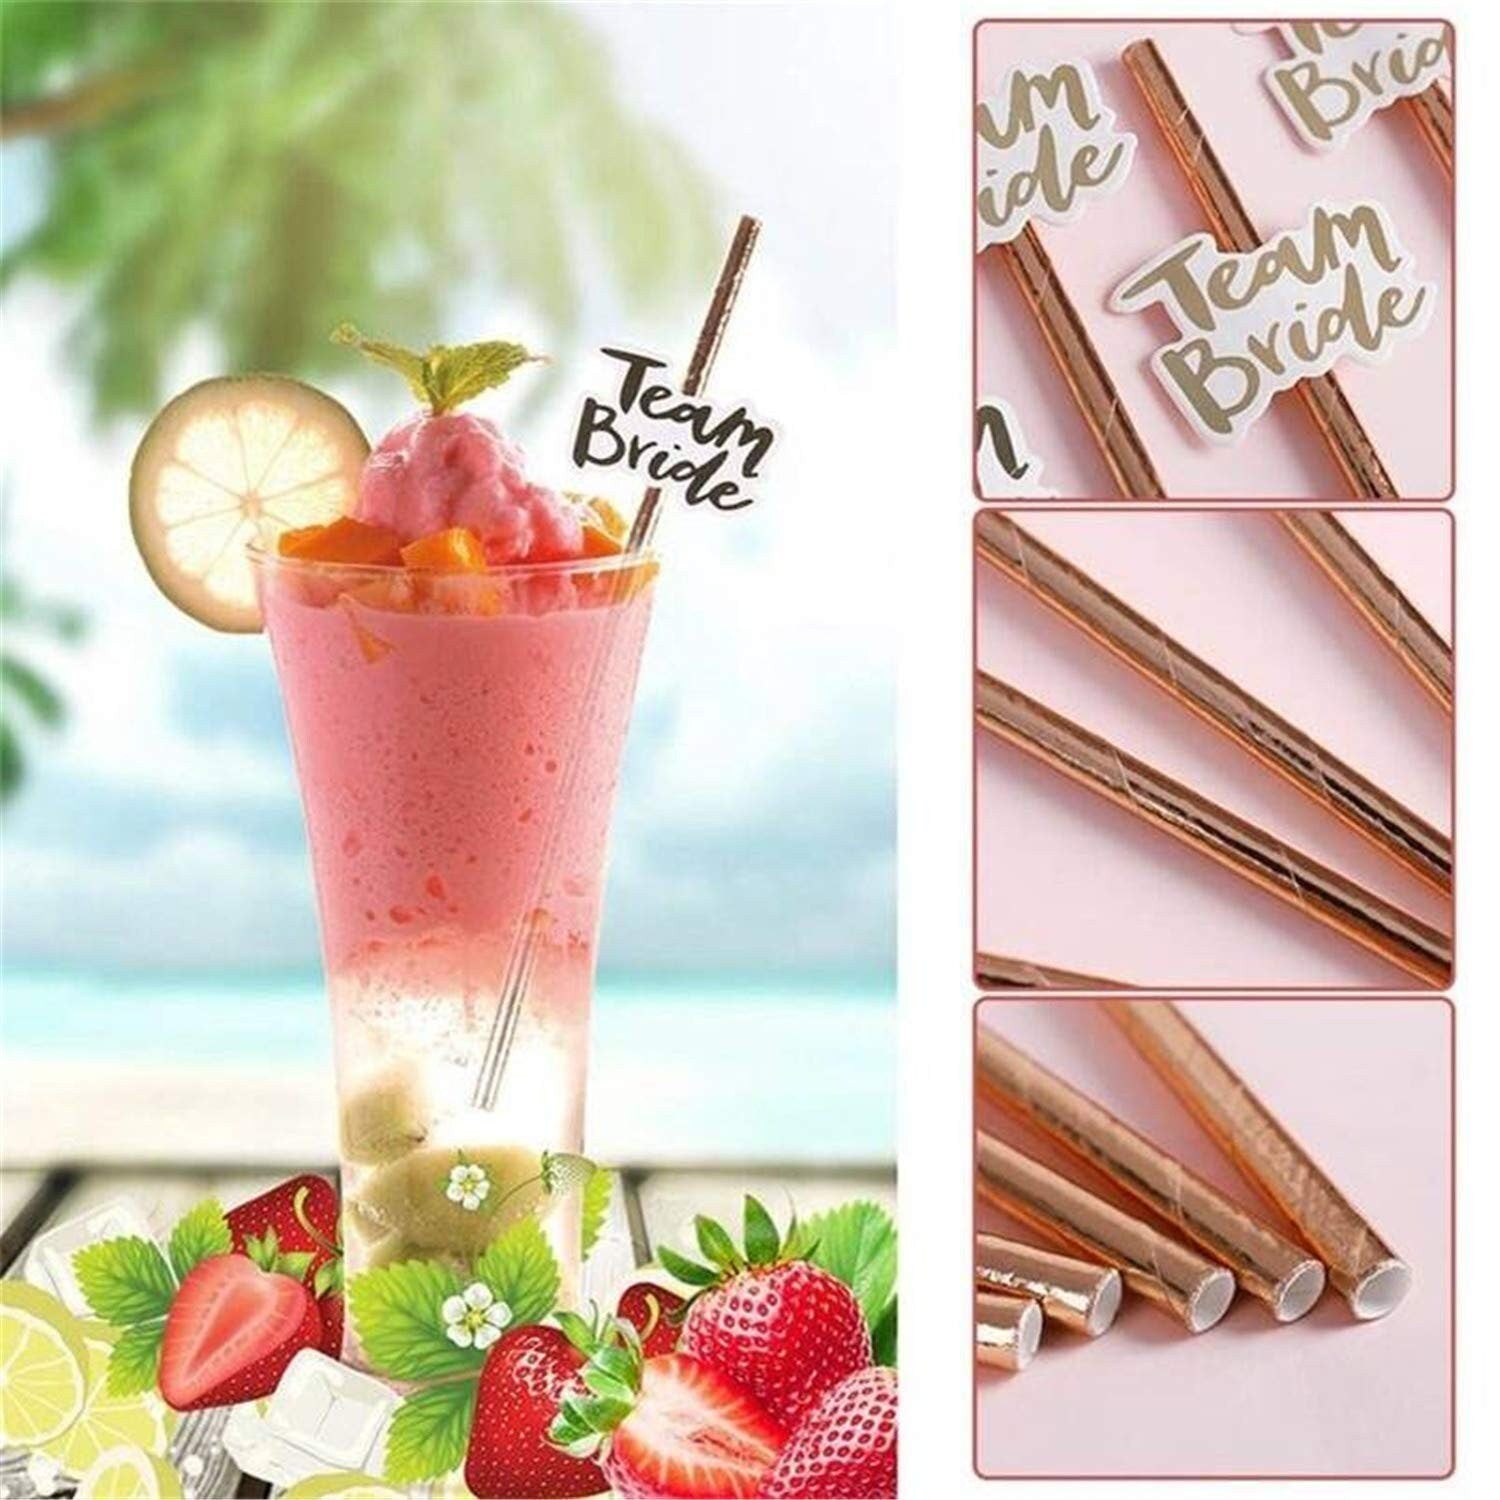 ROSE GOLD Team Bride Tribe FOIL Metallic Paper Straws Hen Party Bridal Shower Party Decor Party Drink Bridal Shower Wedding Drinking Game